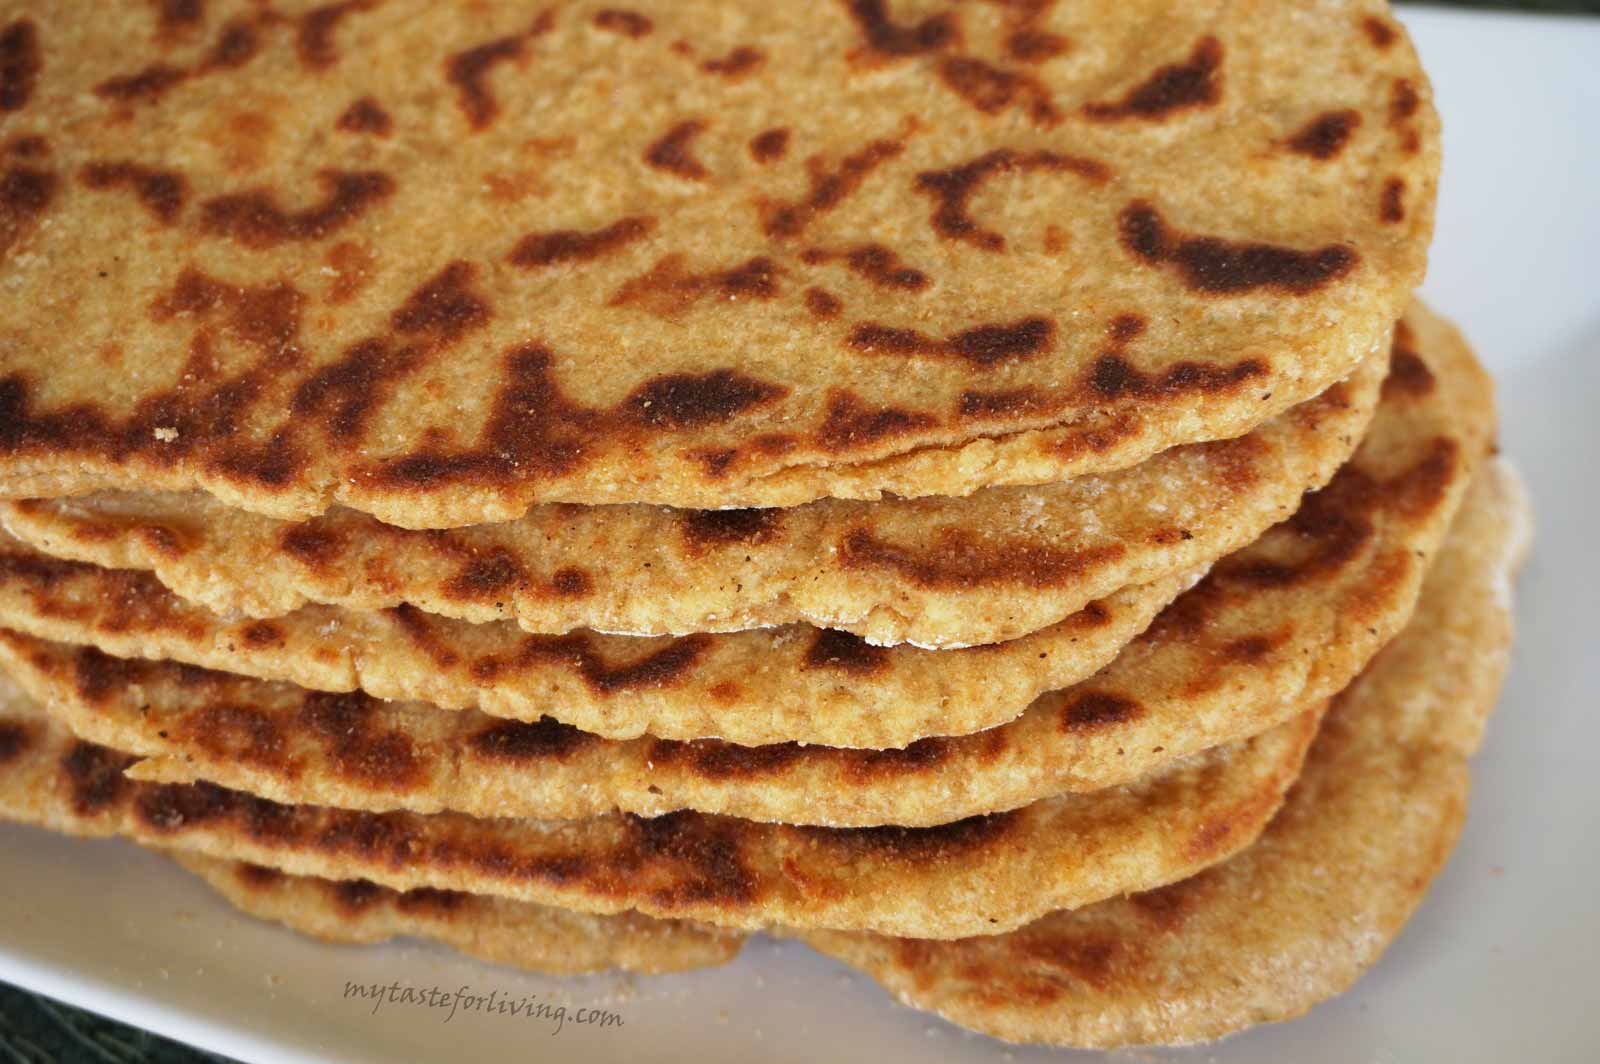 I offer you a very successful recipe for einkorn flatbread. They are relatively easy to prepare and can be consumed with a main dishes or spread with pesto, hummus, cream cheese or garlic butter. 